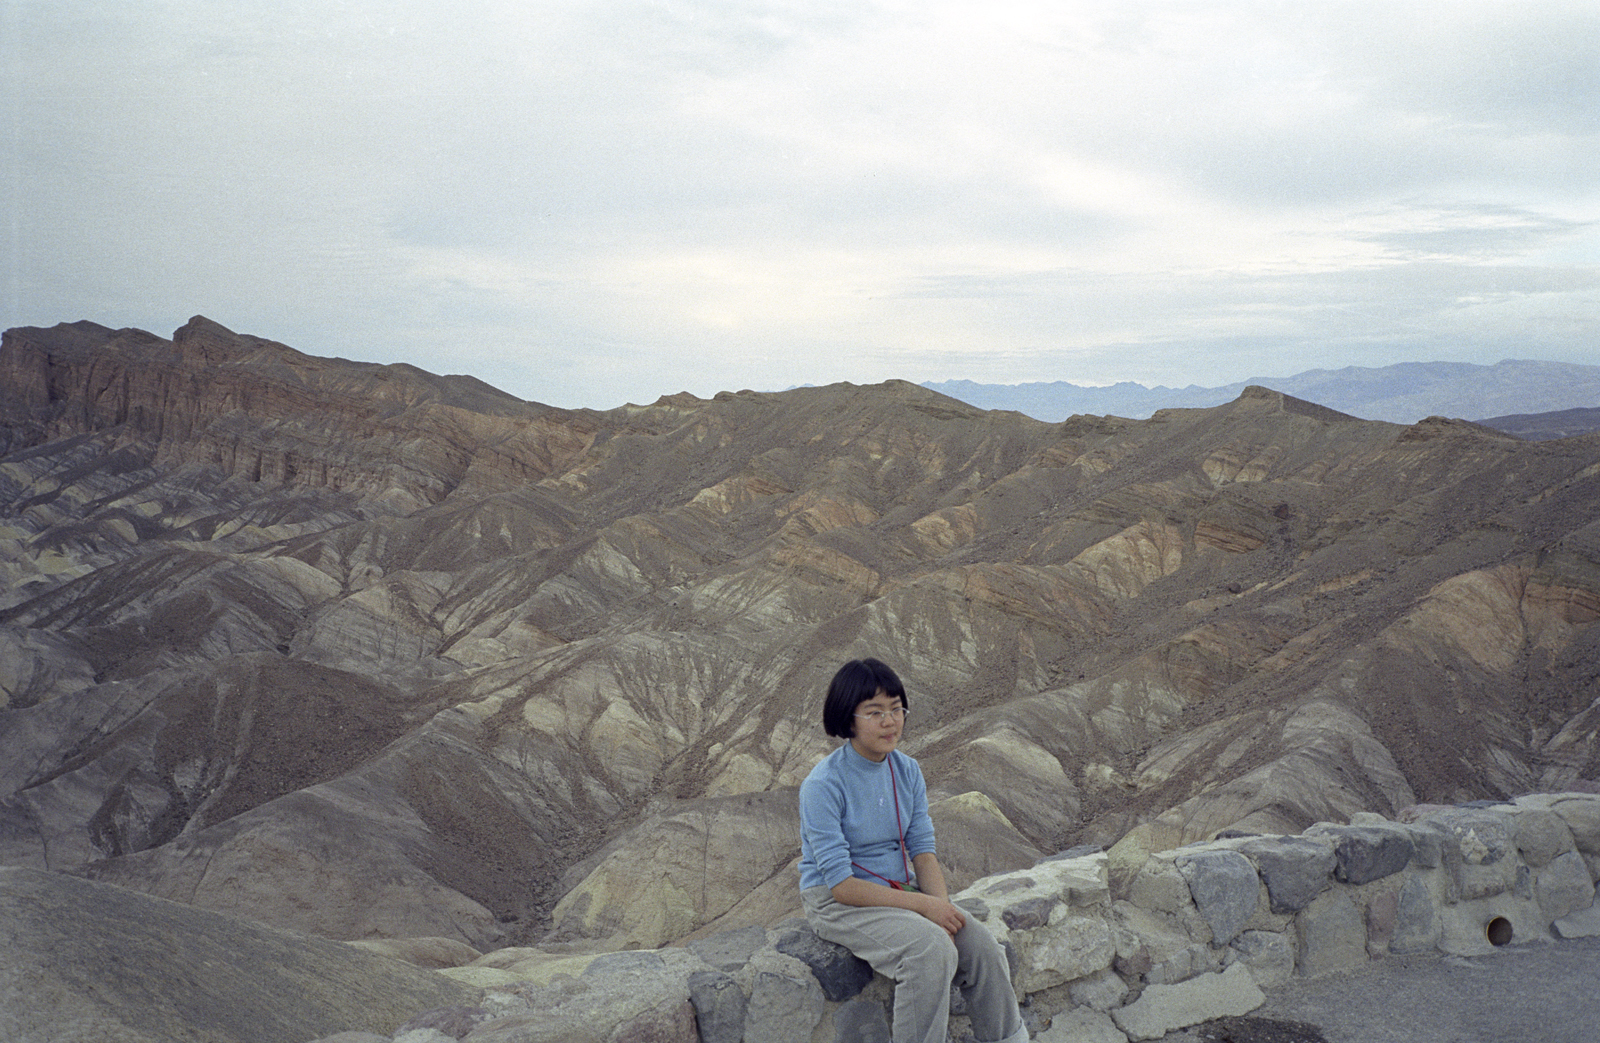 Color photograph of a young East Asian girl wearing a blue shirt, seated on a rock wall in front of a hilly desert landscape